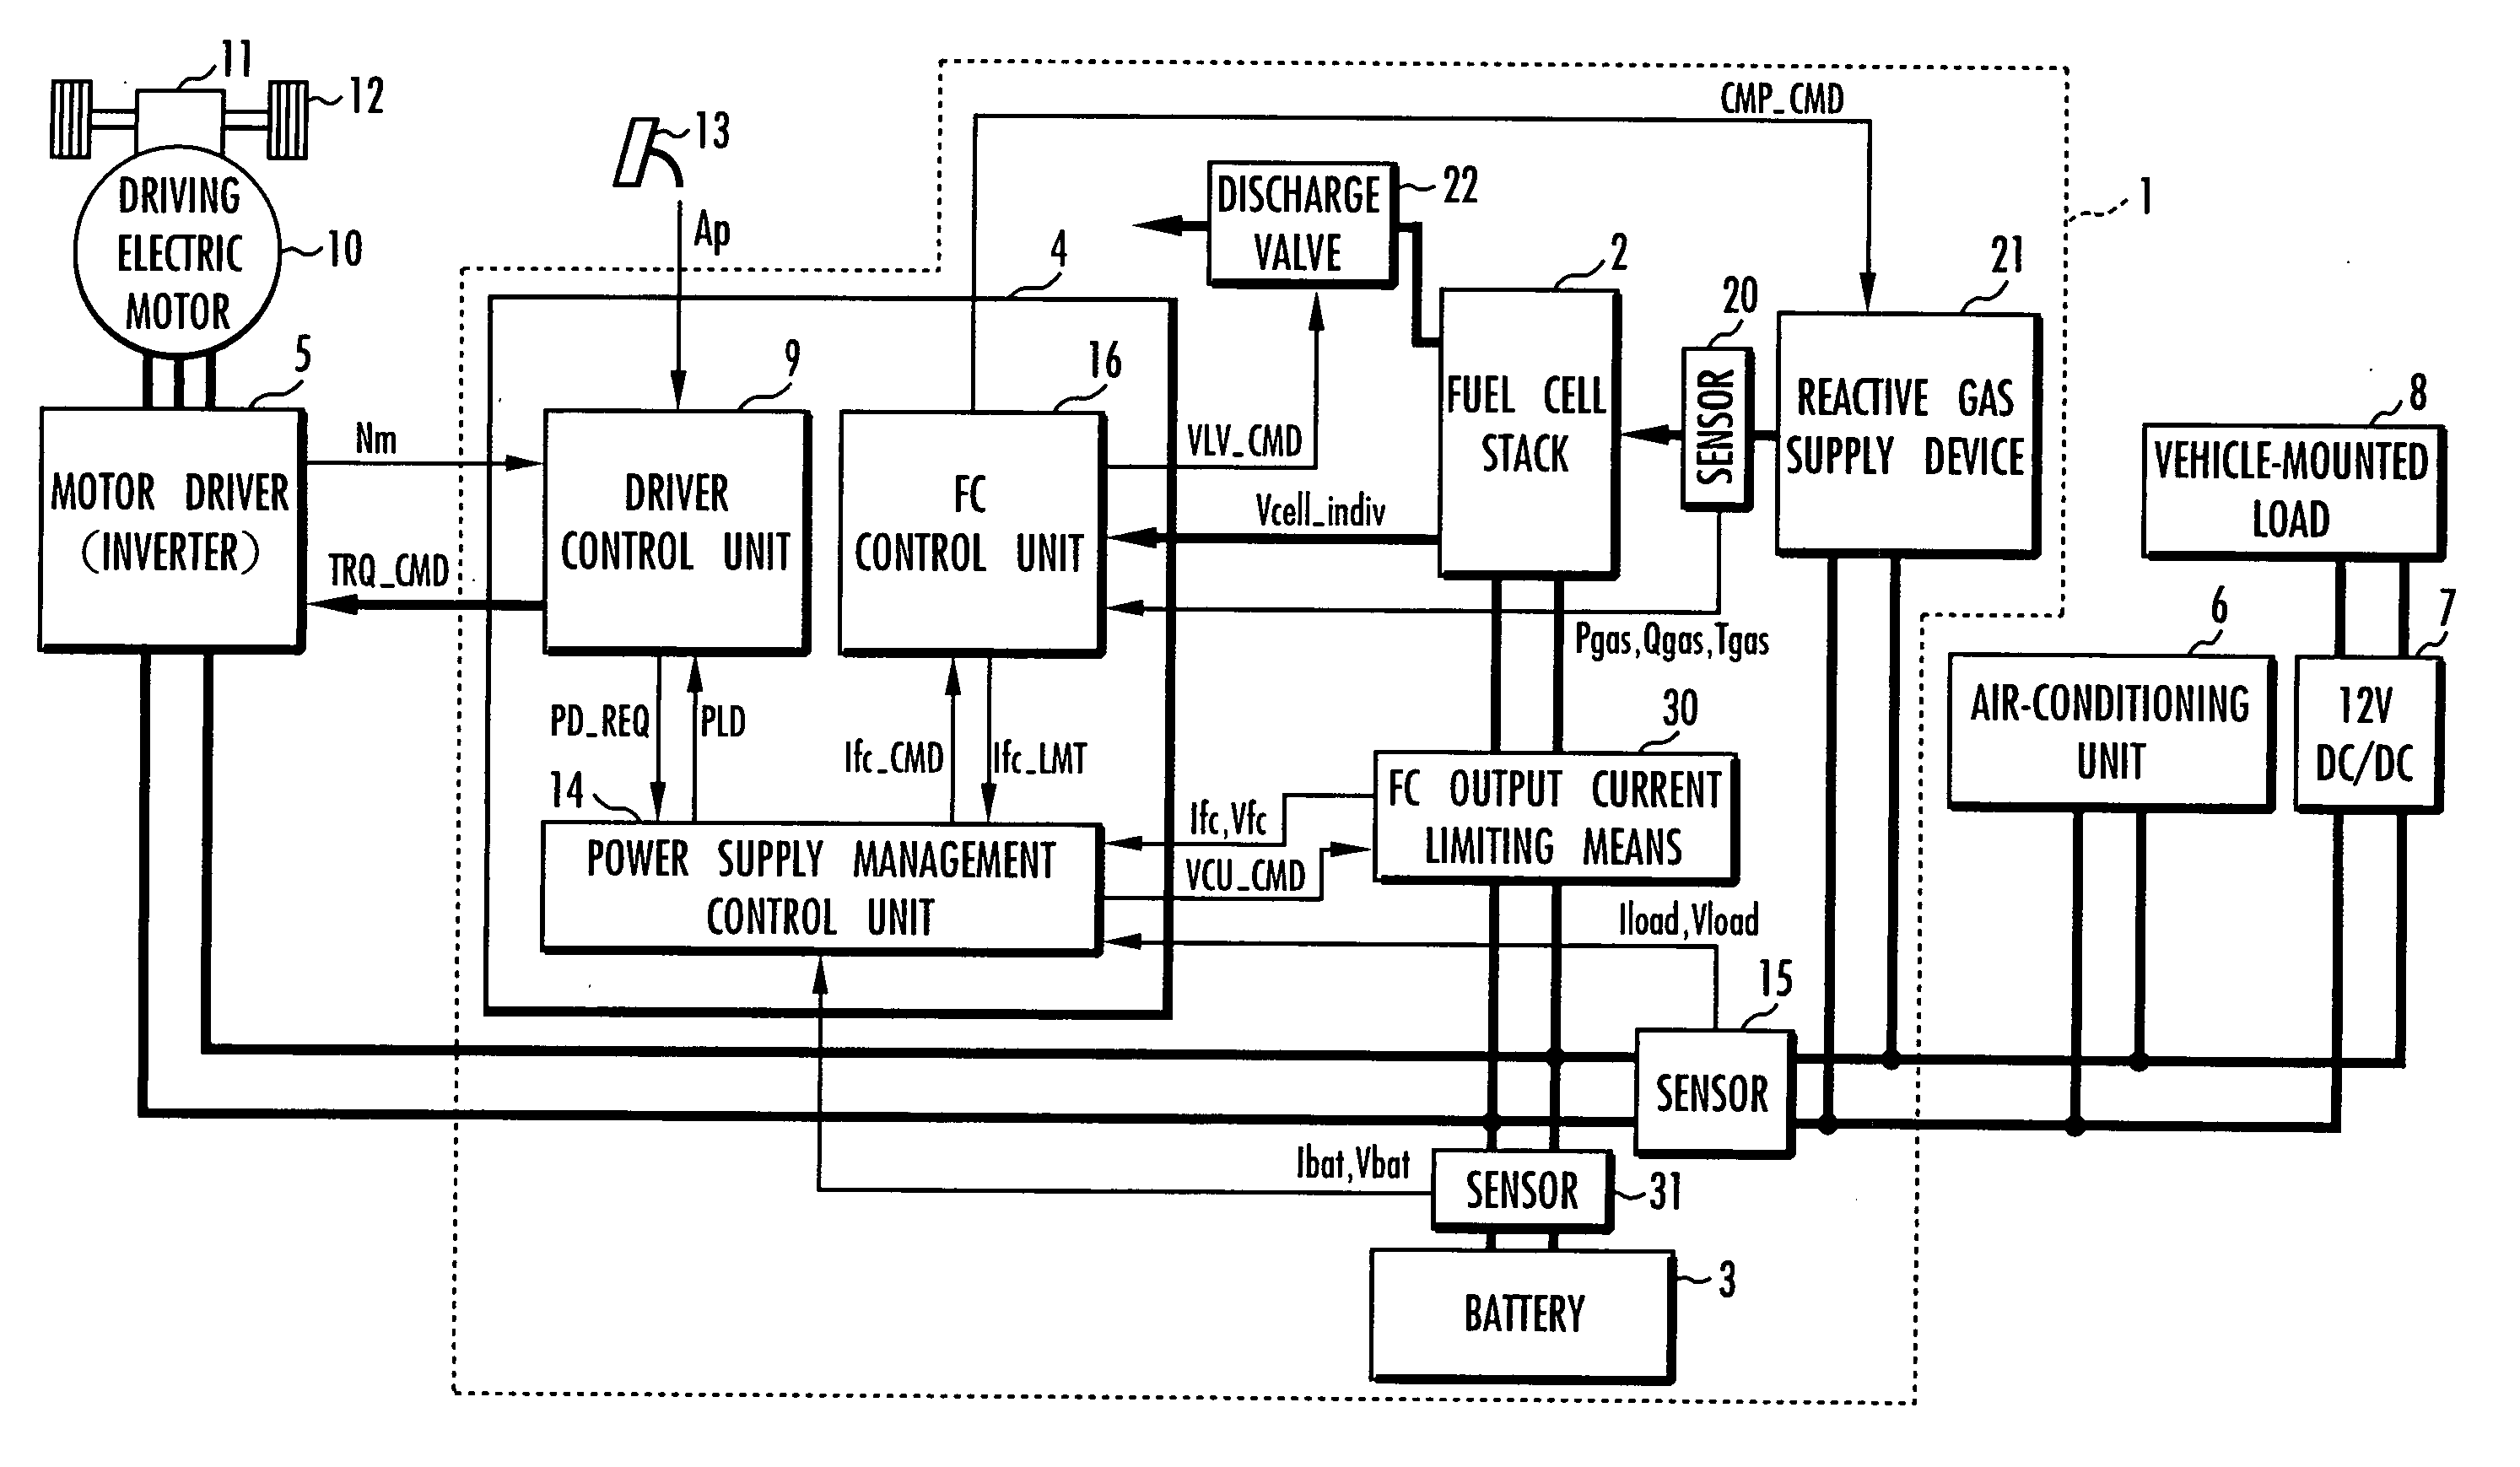 Control device for fuel cell vehicle